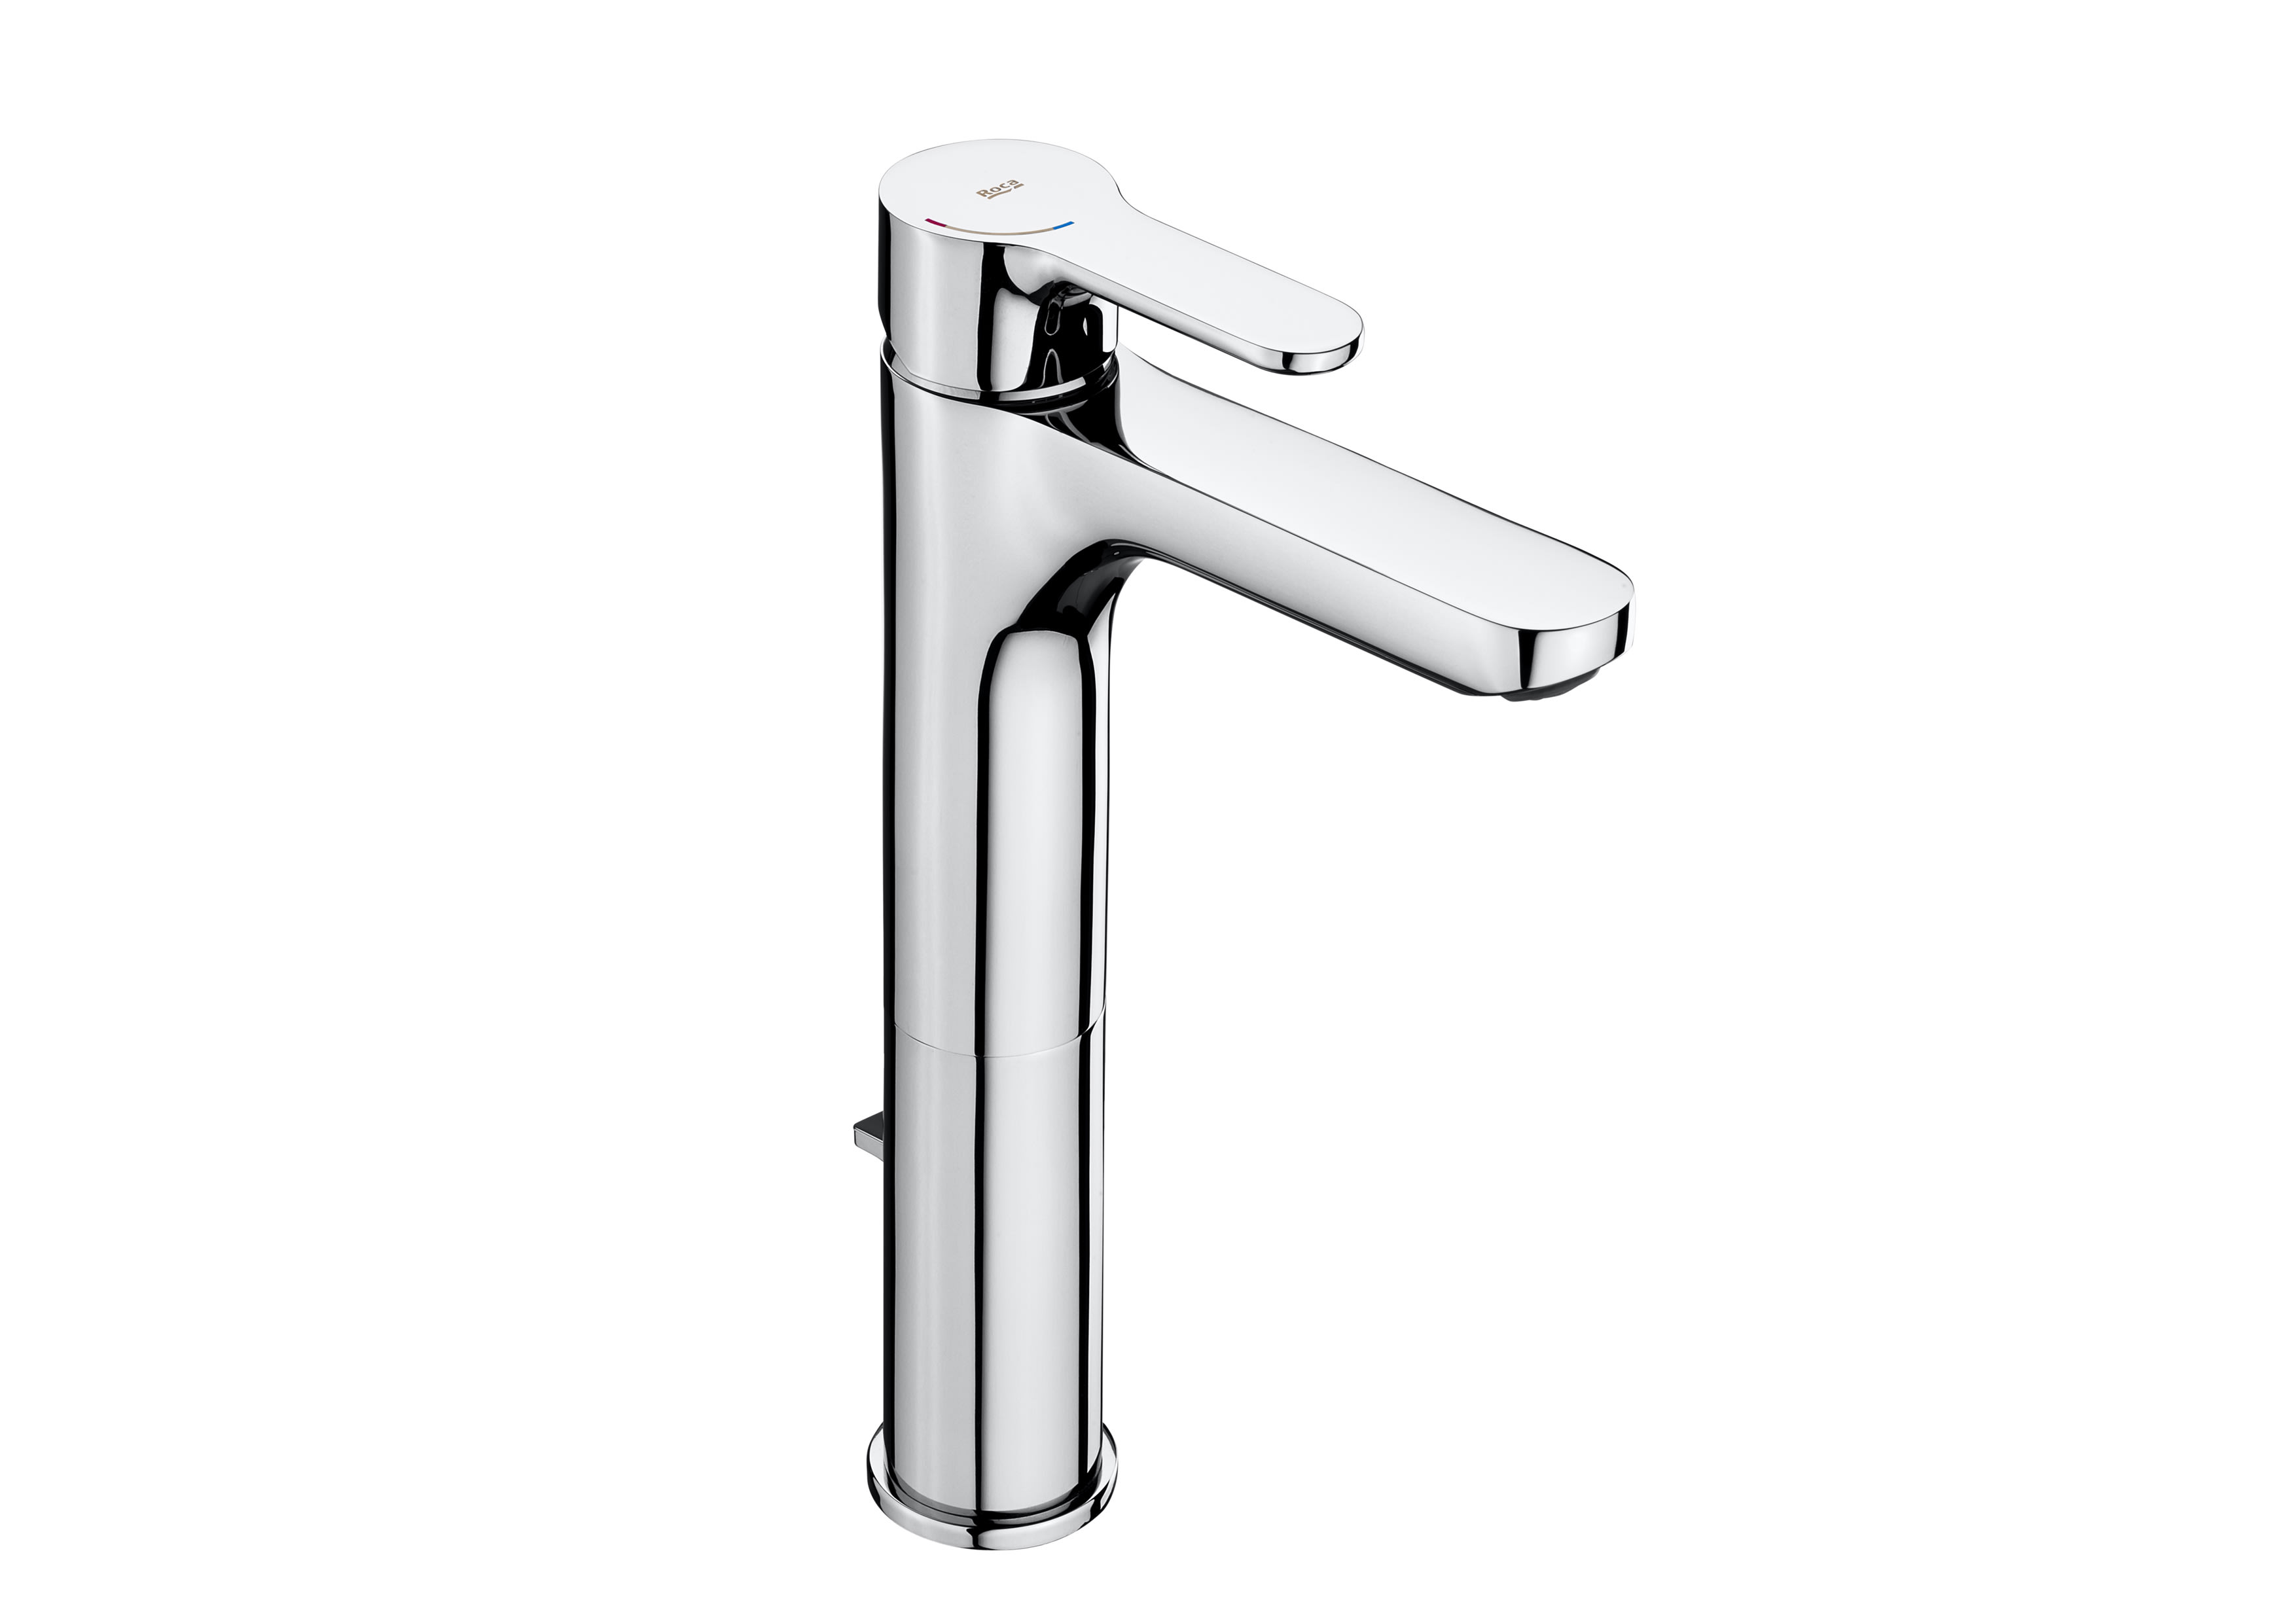 High neck basin mixer with pop-up waste, Cold Start, XL handle